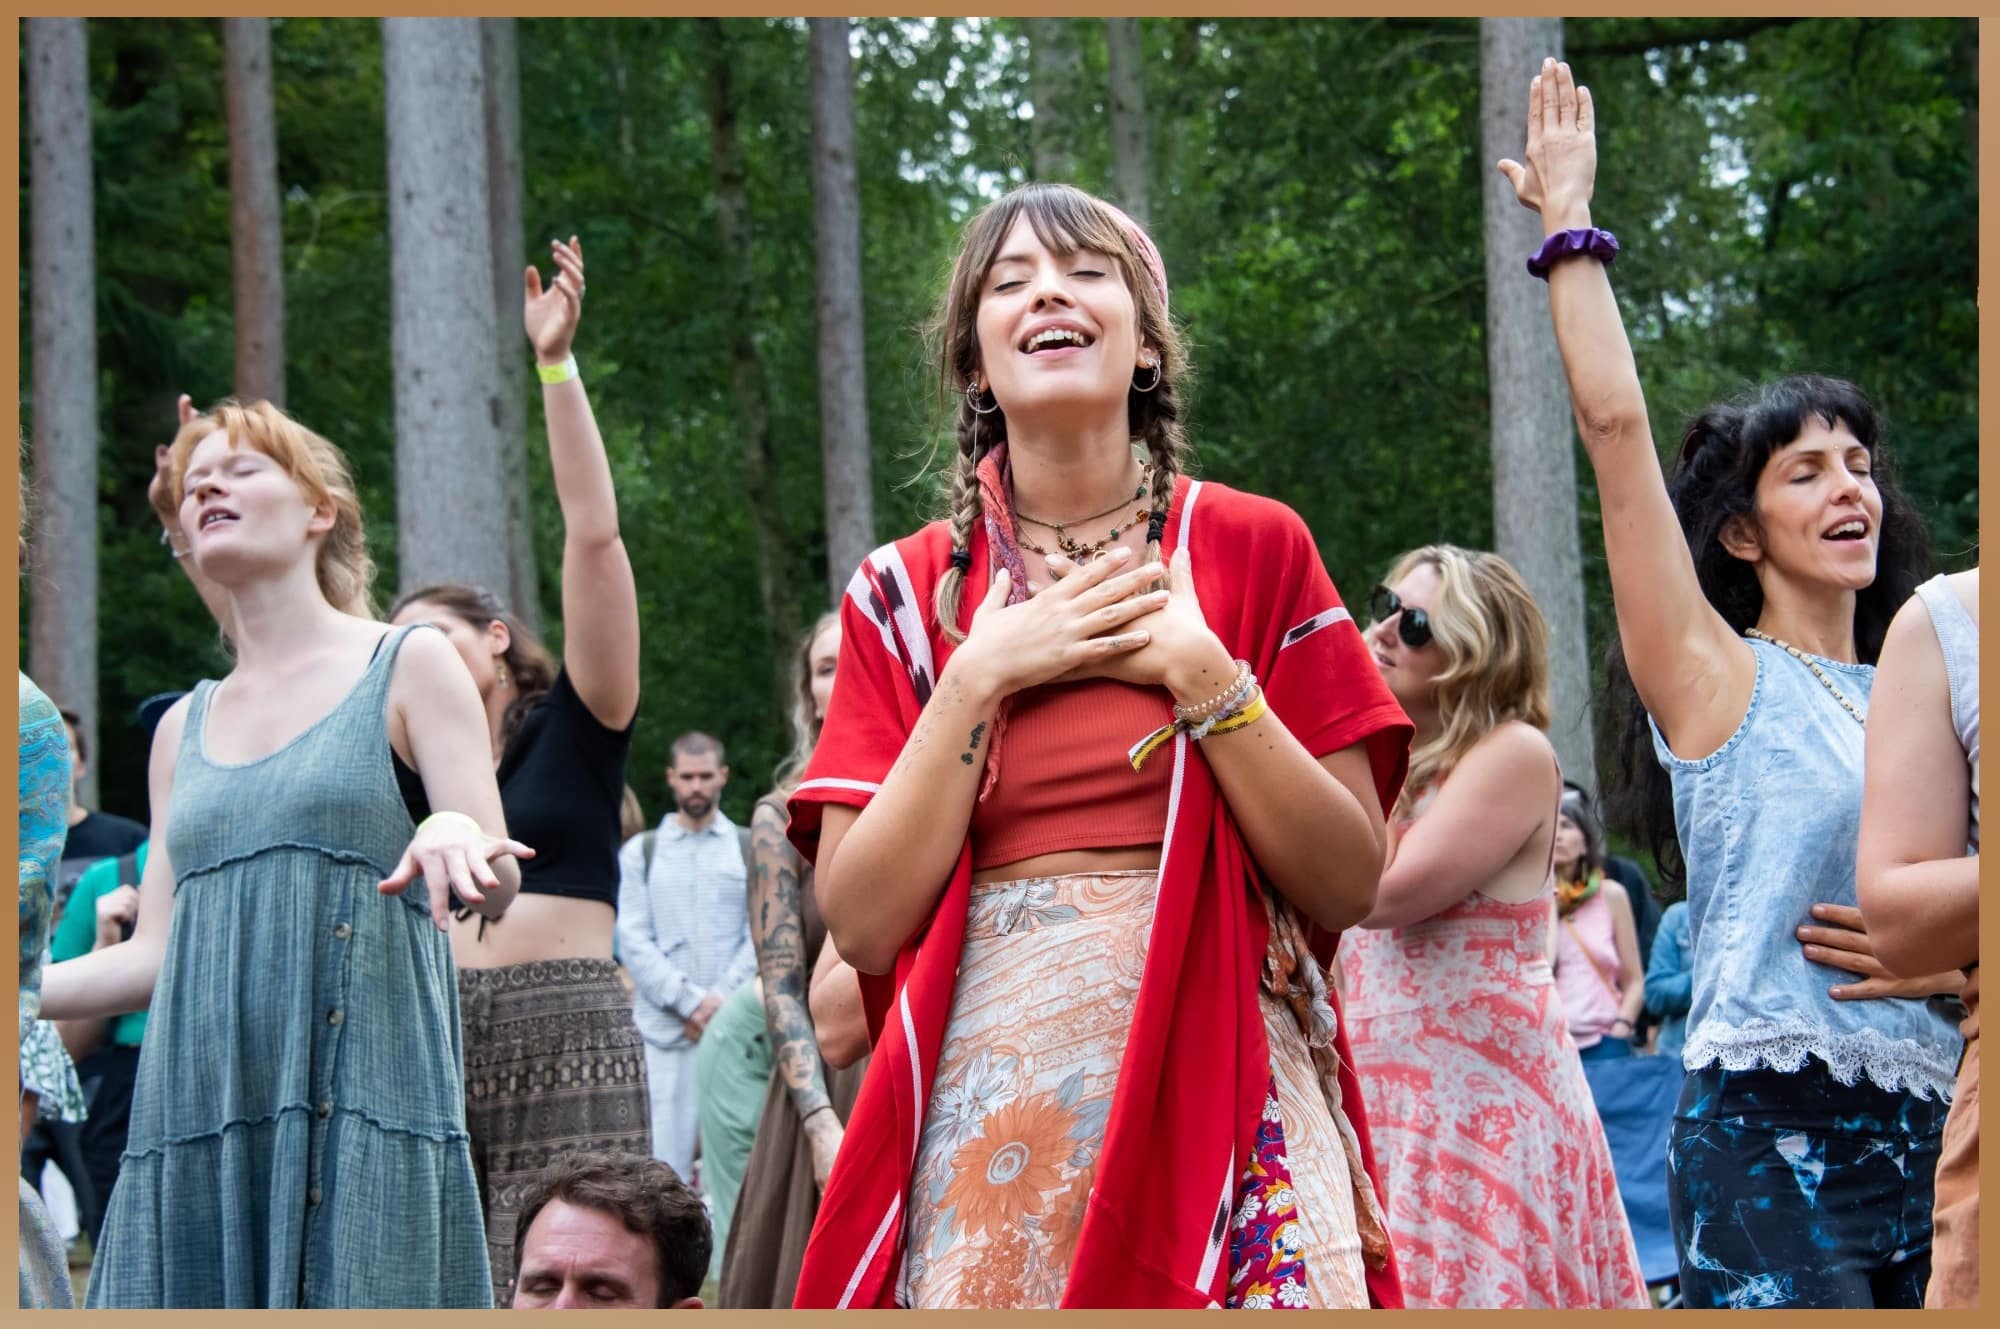 A woman joyfully dances among other participants in a forest setting at the Medicine Festival, embodying the festival's focus on personal growth and communal healing.